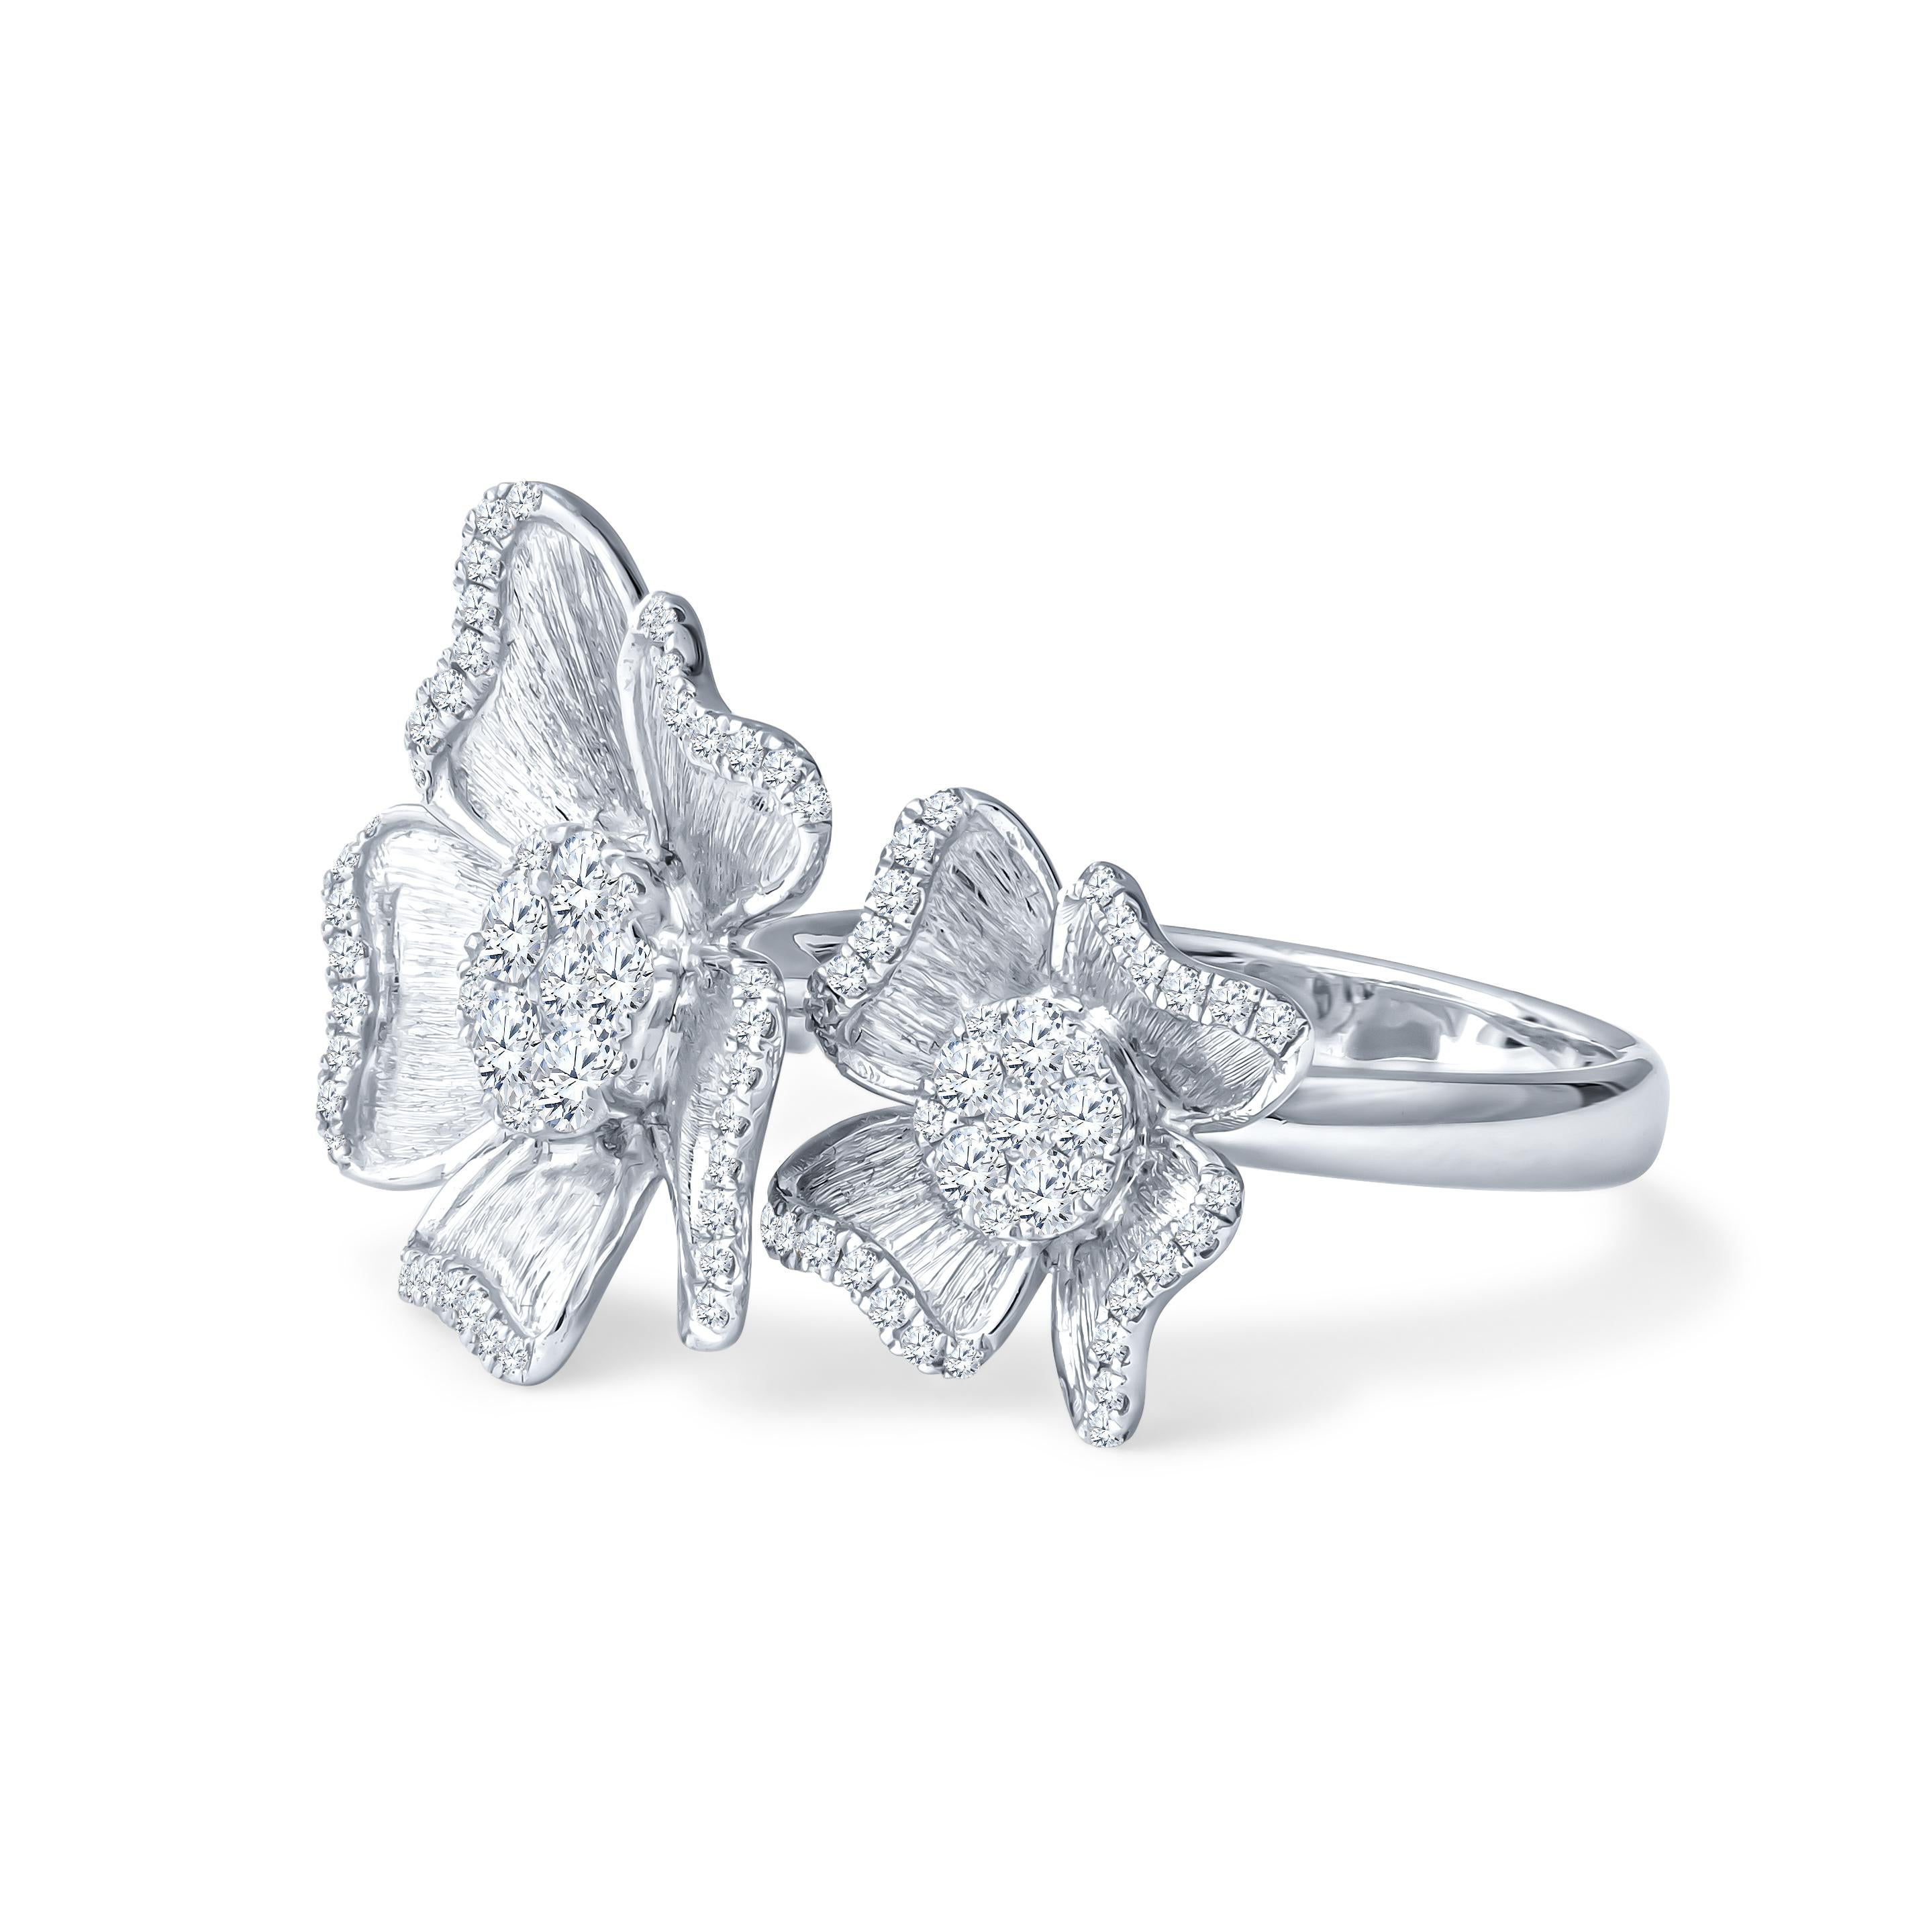 This exquisite ring is a stunning 0.67ctw in round cut diamonds, adorning two 18kt white gold flowers. It is a size 6.5 ring, but can be resized upon request. 